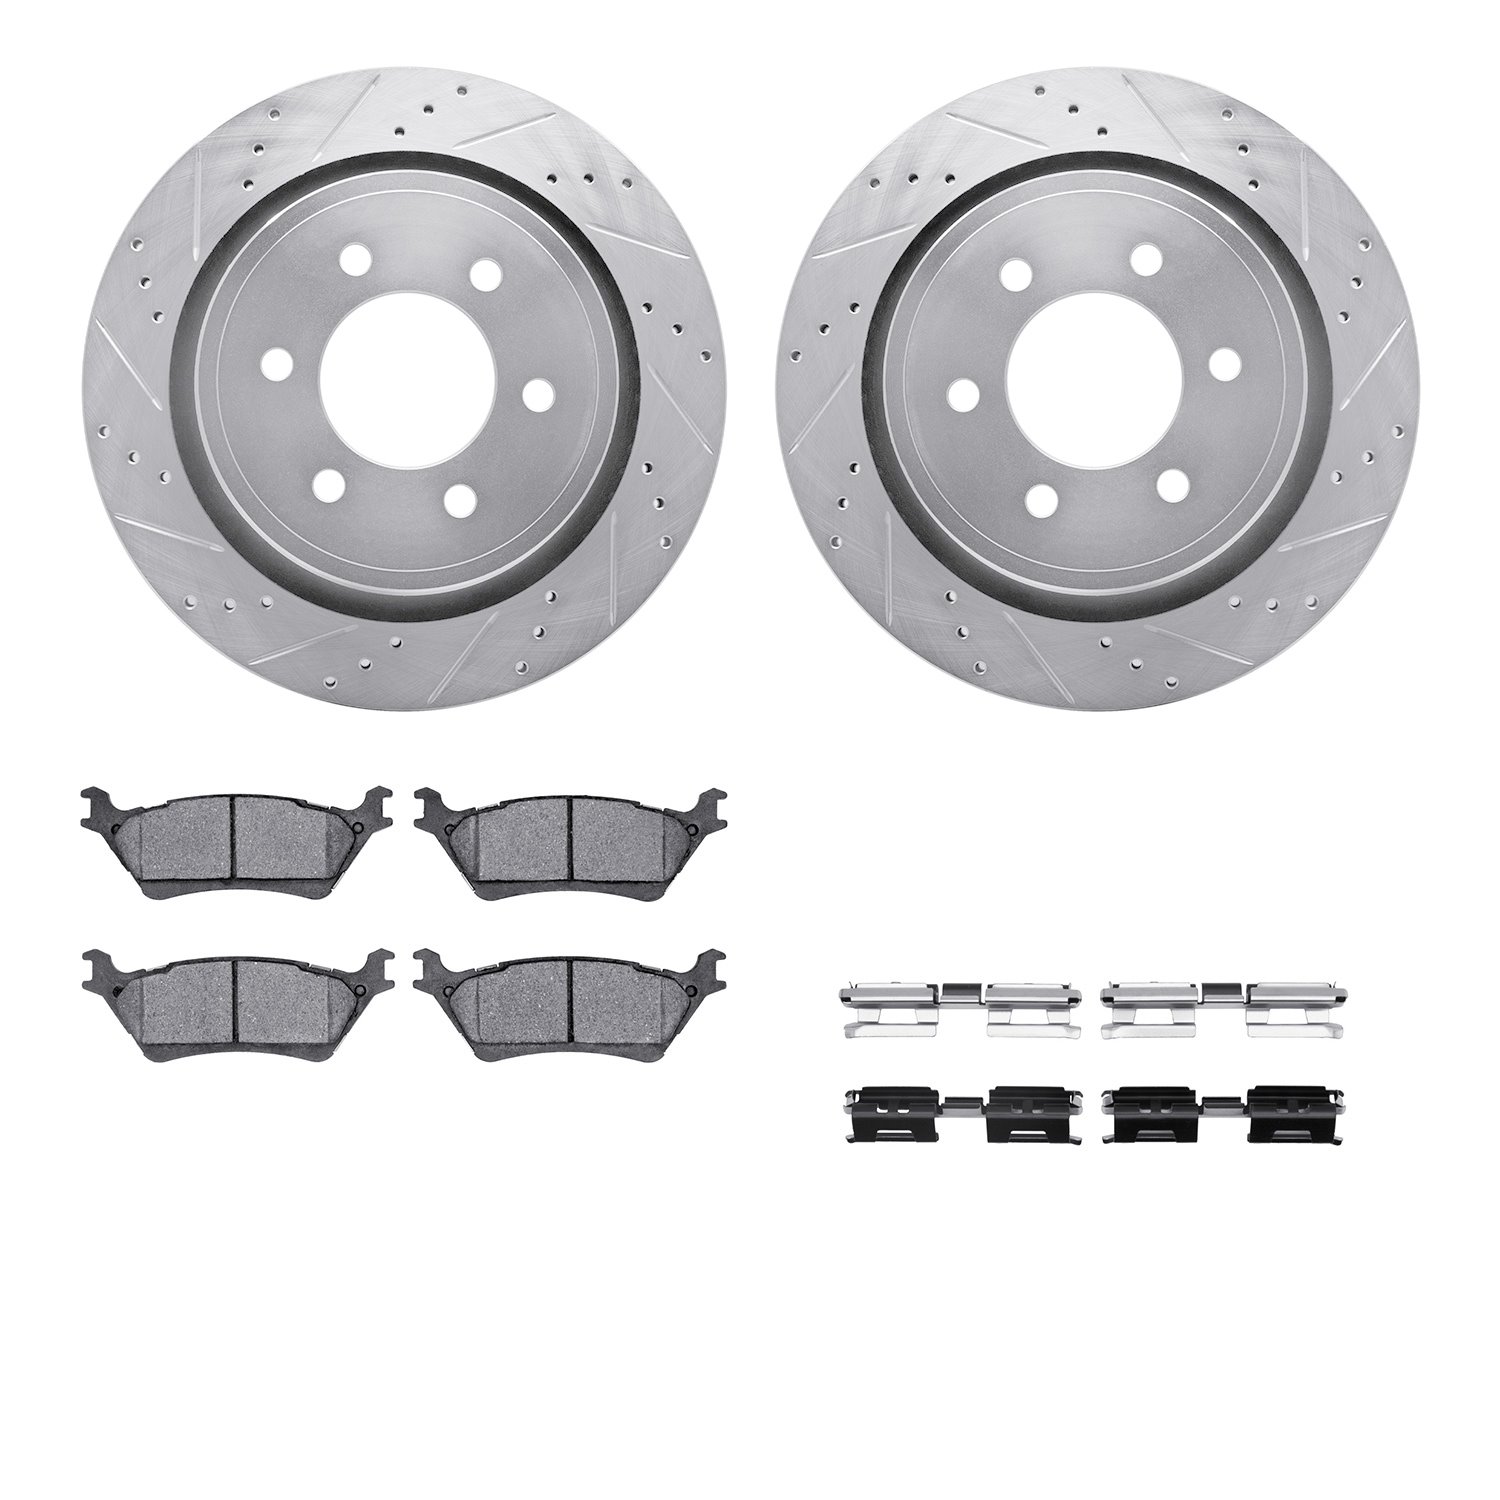 7412-54097 Drilled/Slotted Brake Rotors with Ultimate-Duty Brake Pads Kit & Hardware [Silver], 2012-2020 Ford/Lincoln/Mercury/Ma